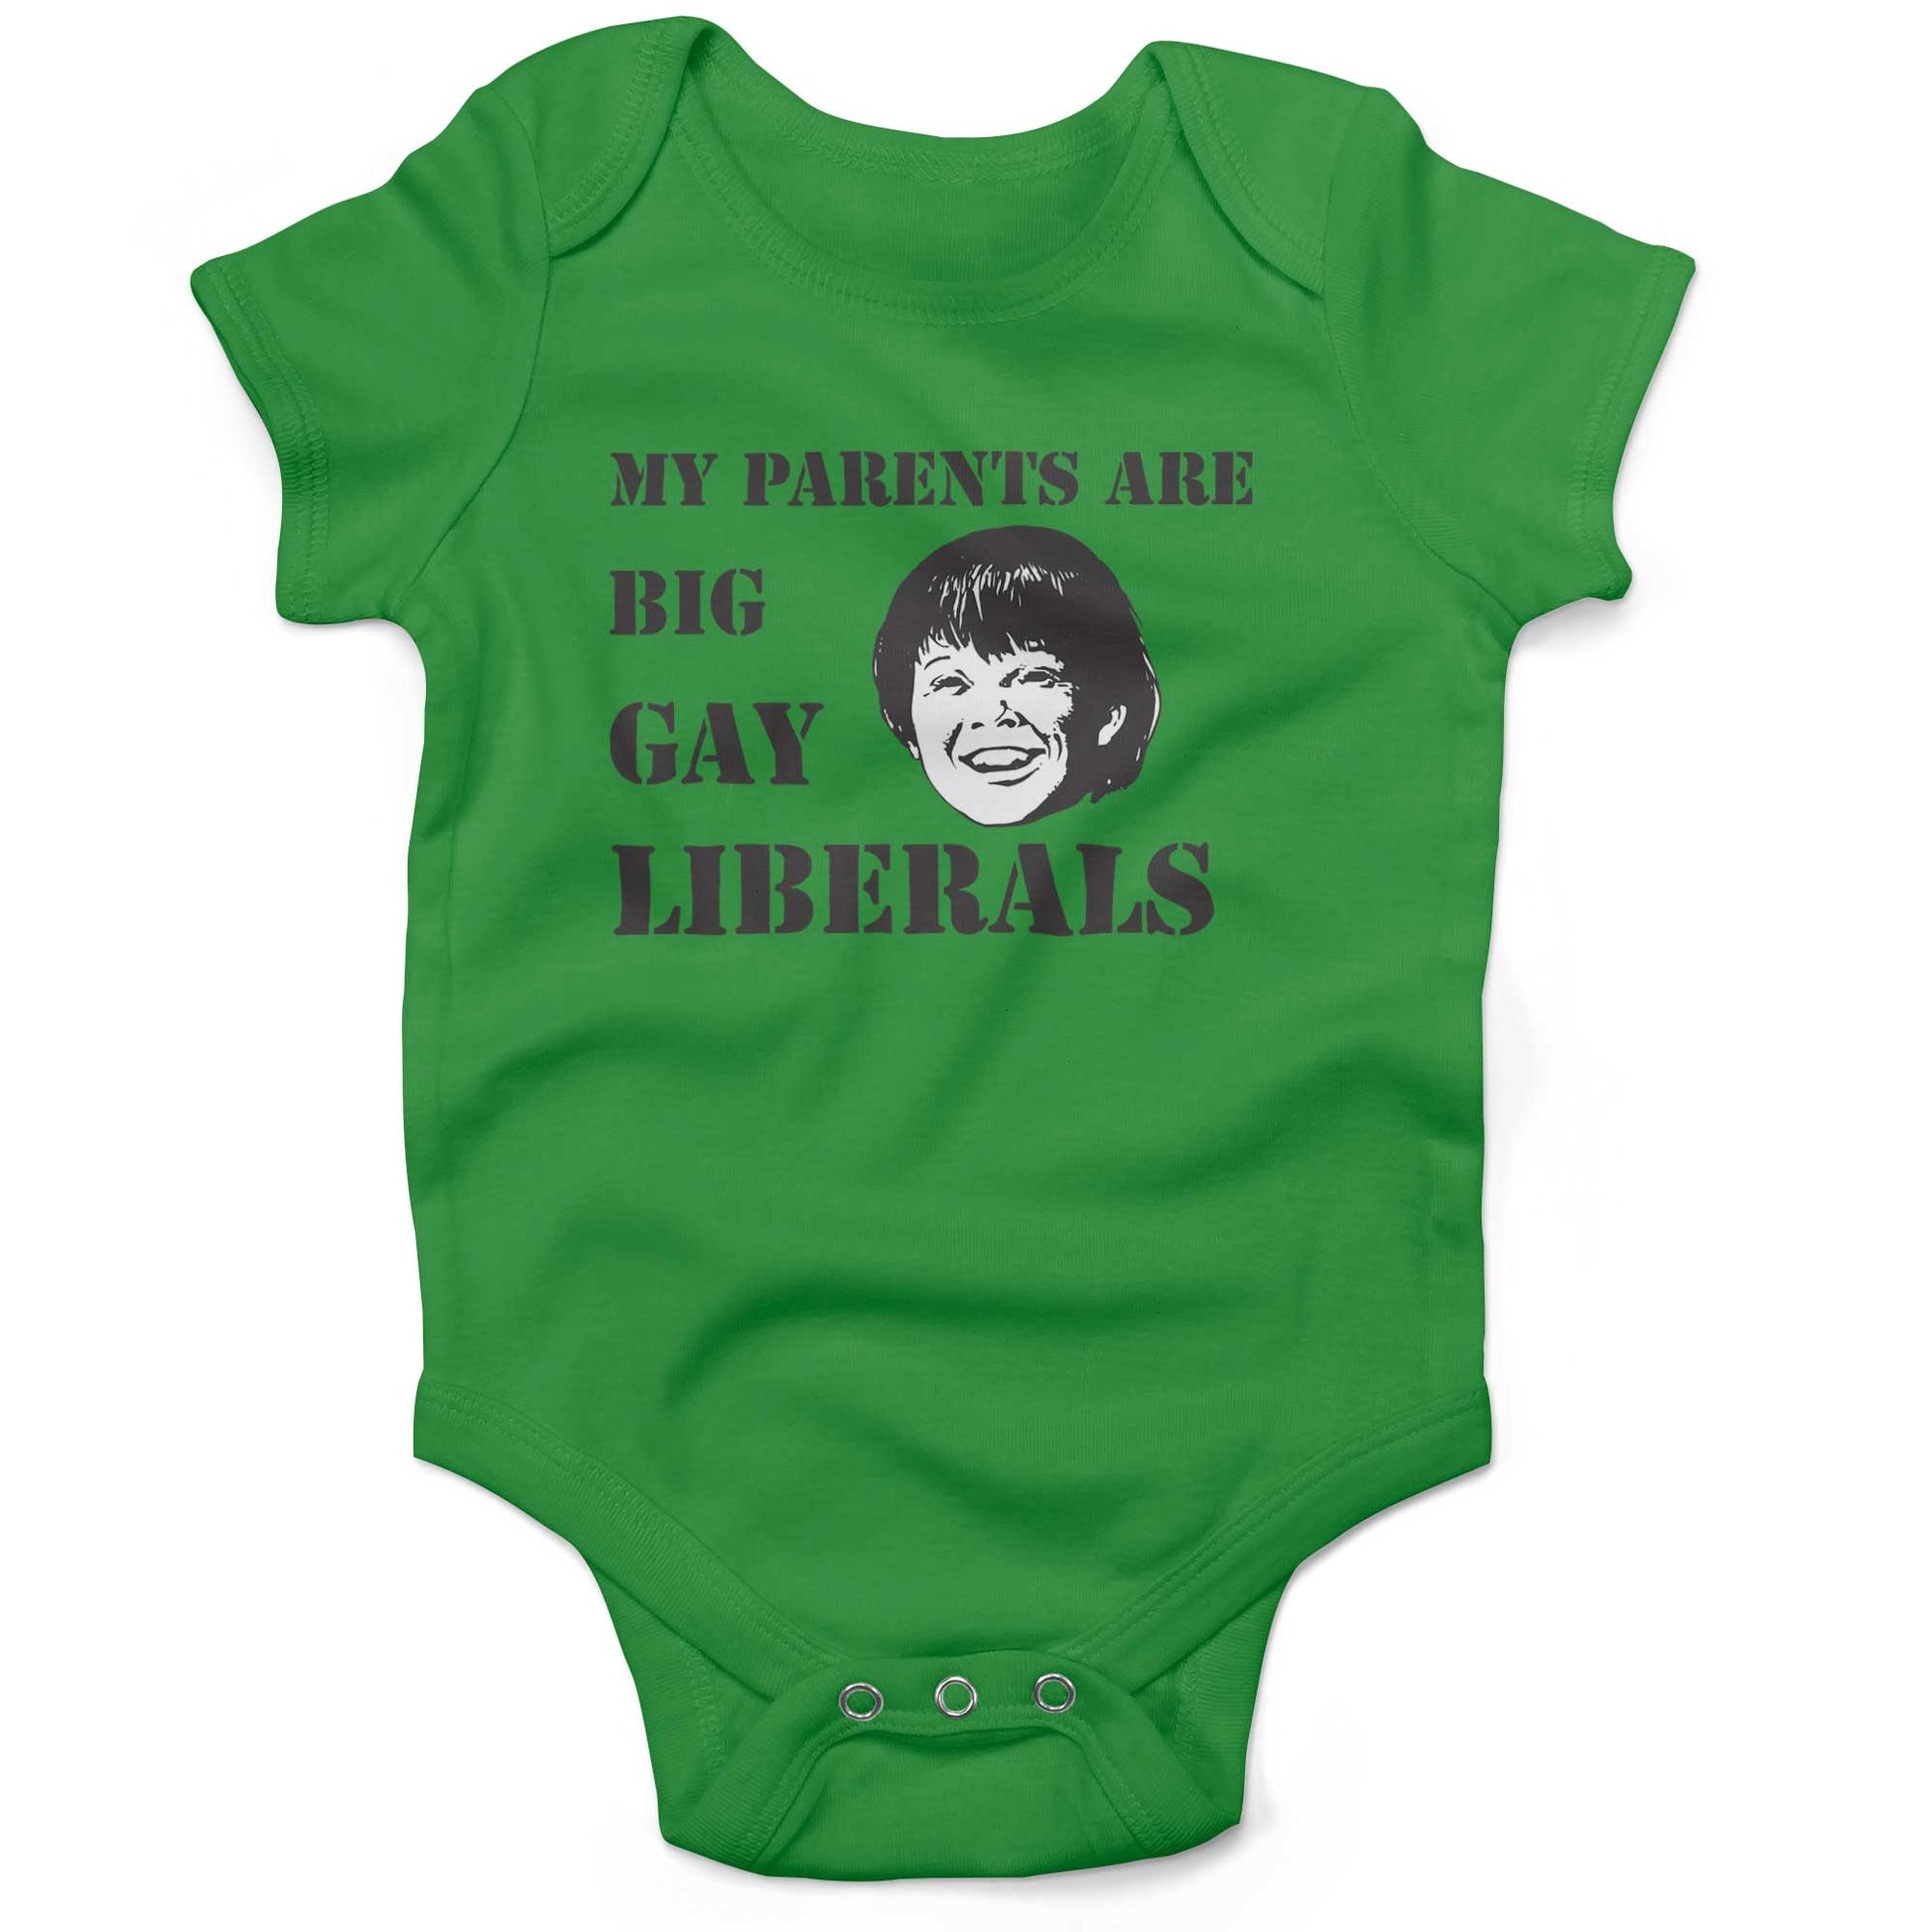 My Parents Are Big, Gay Liberals Infant Bodysuit or Raglan Baby Tee-Grass Green-3-6 months